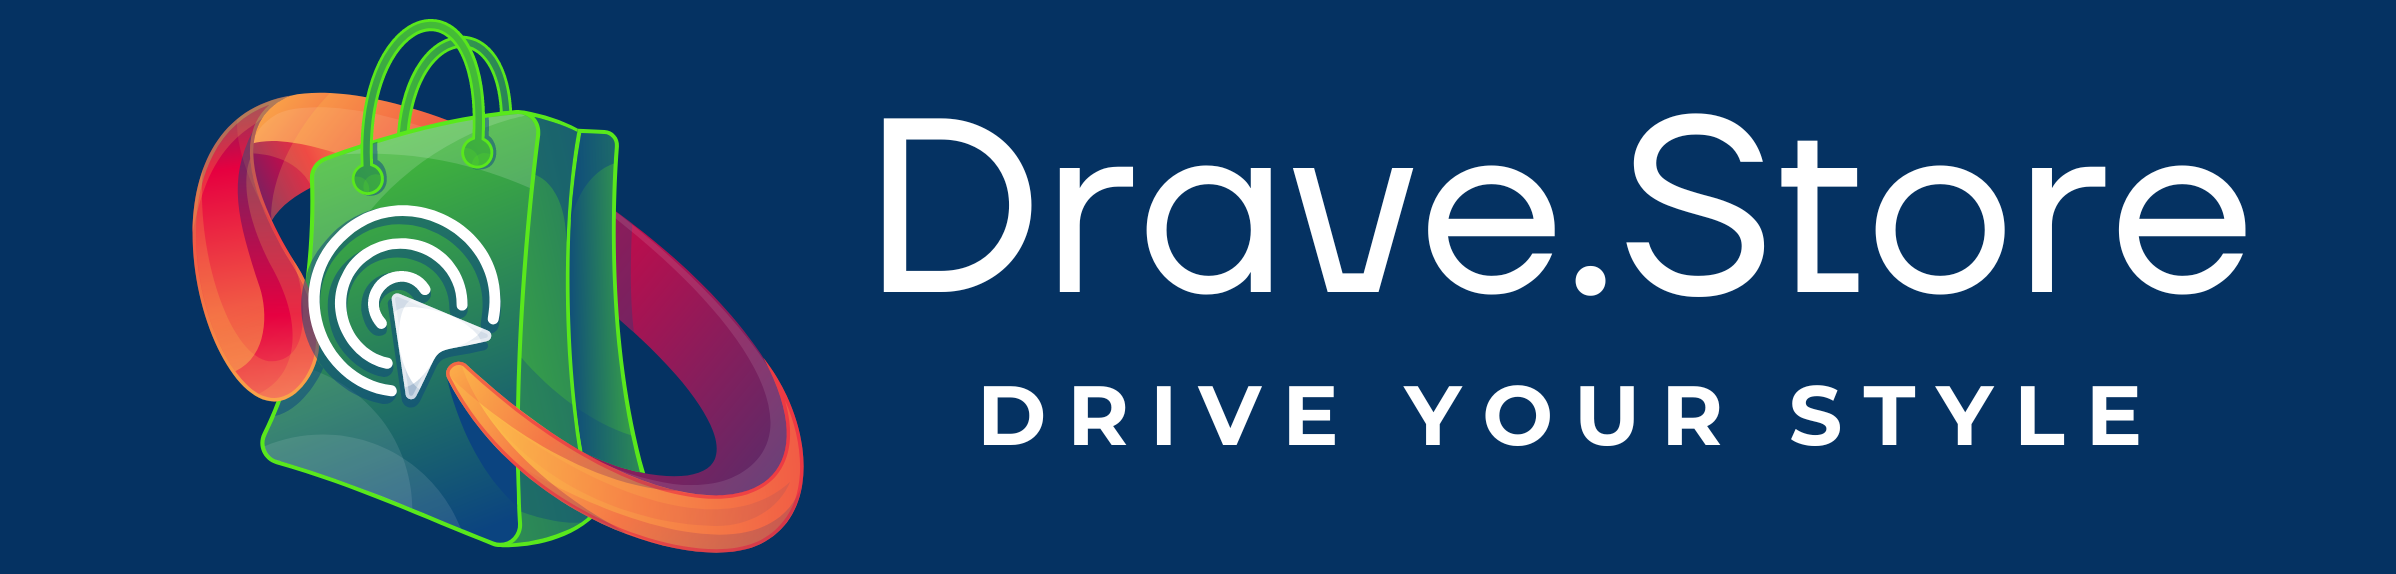 Drave.Store - Drive Your Style